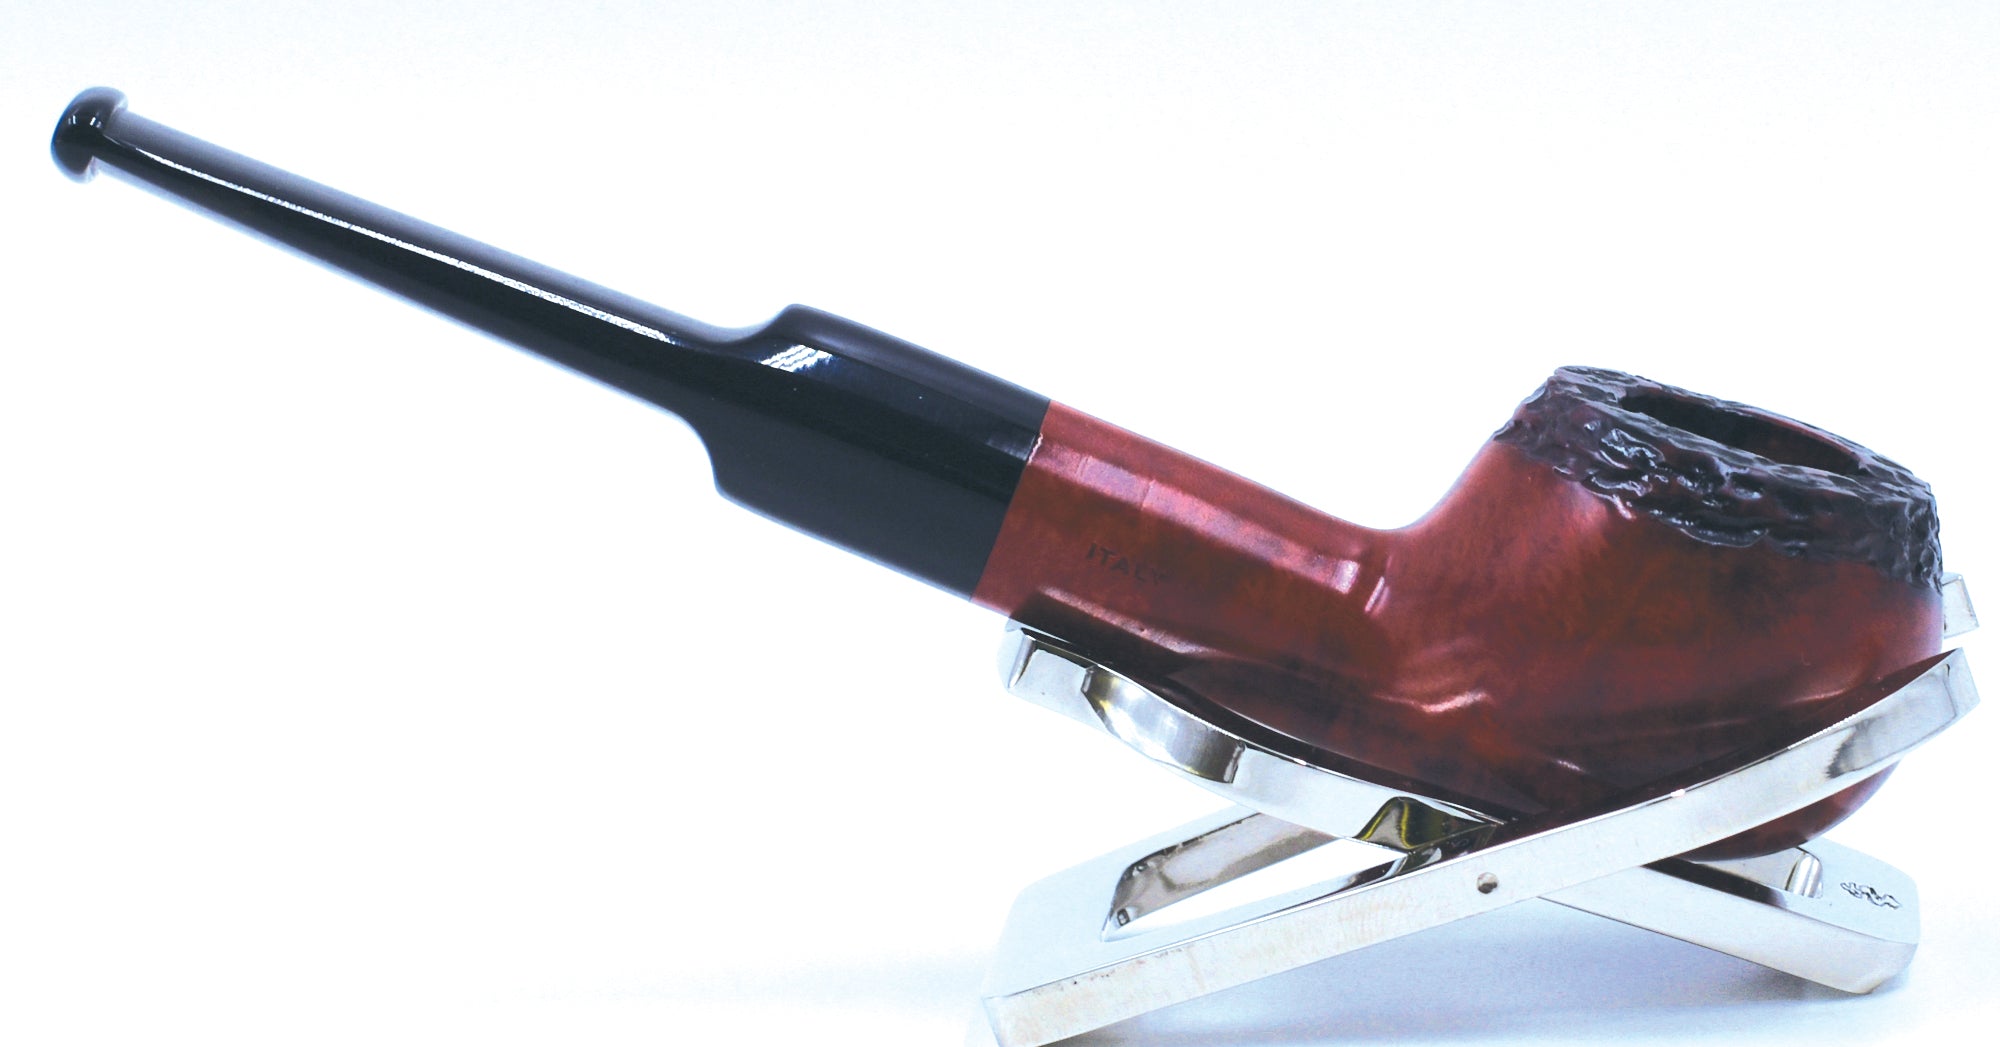 LEGENDEX® SCALADI* 9 MM Filtered Briar Smoking Pipe Made In Italy 01-08-121